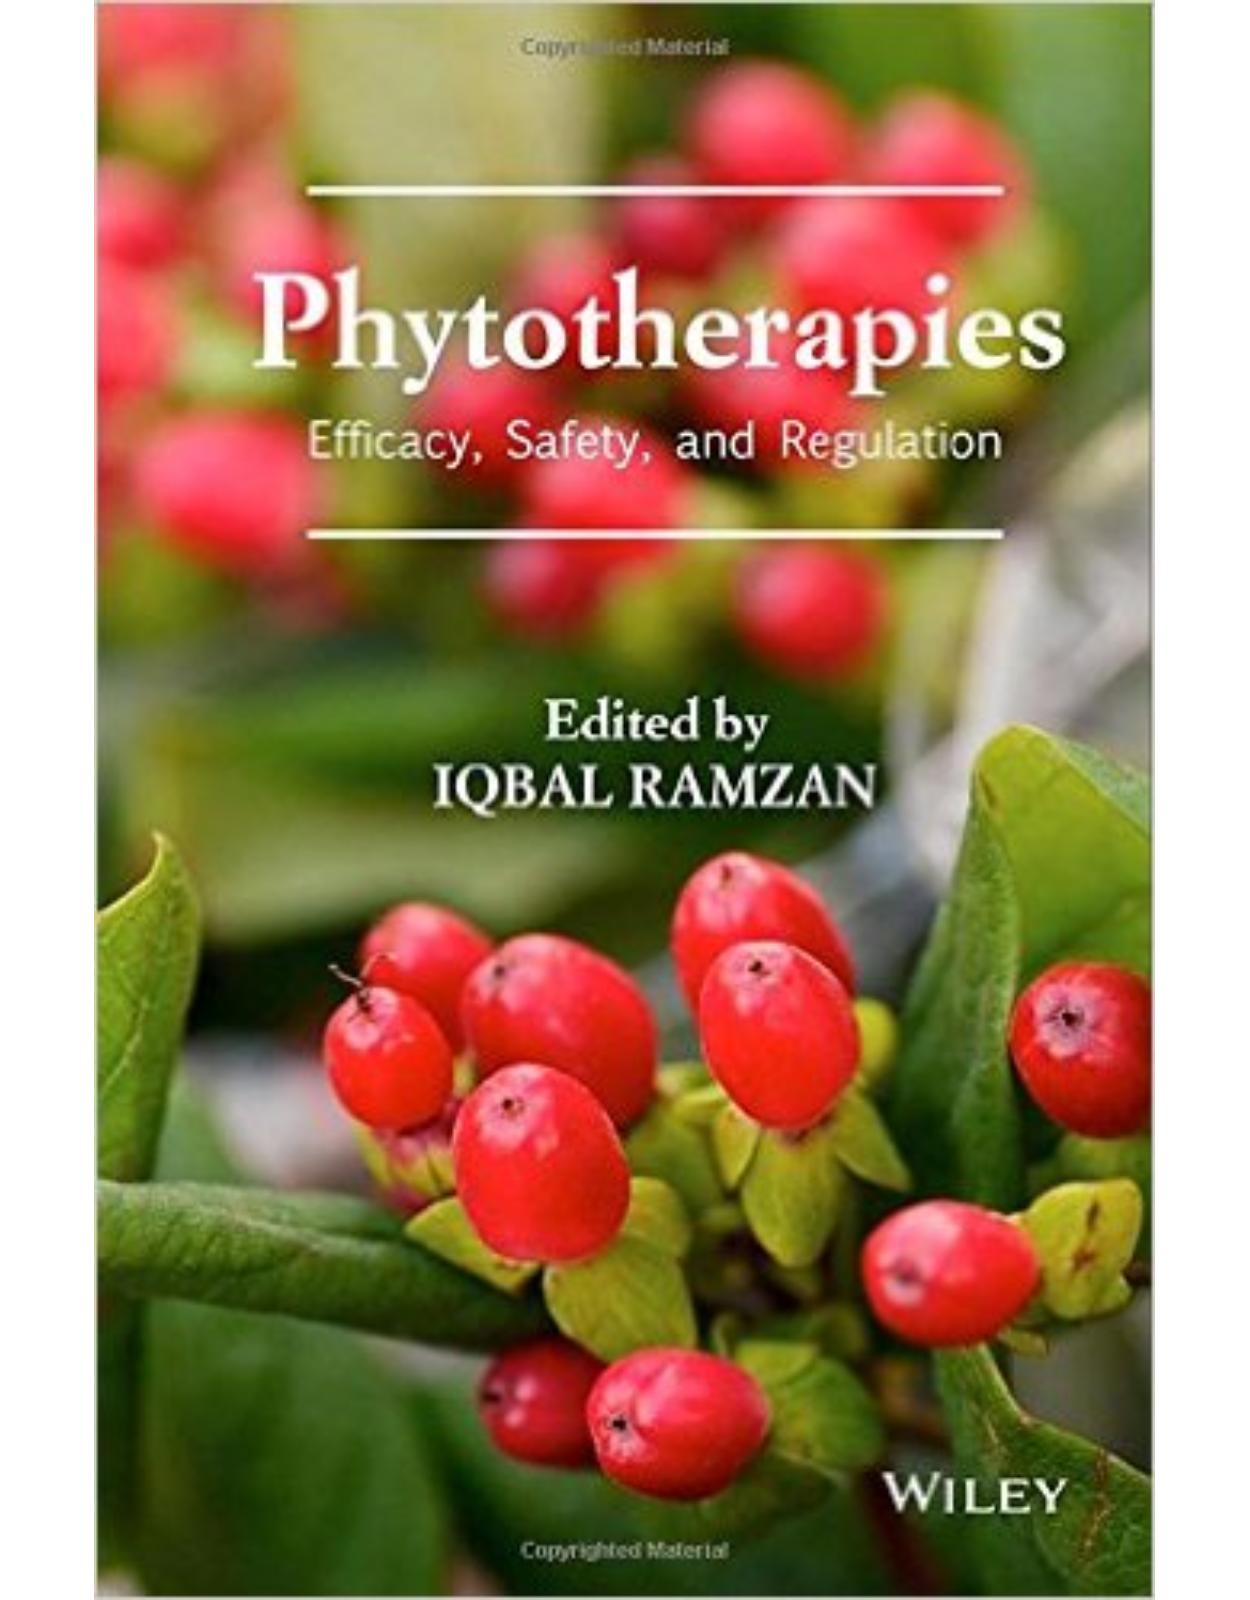 Phytotherapies: Efficacy, Safety, and Regulation 1st Edition